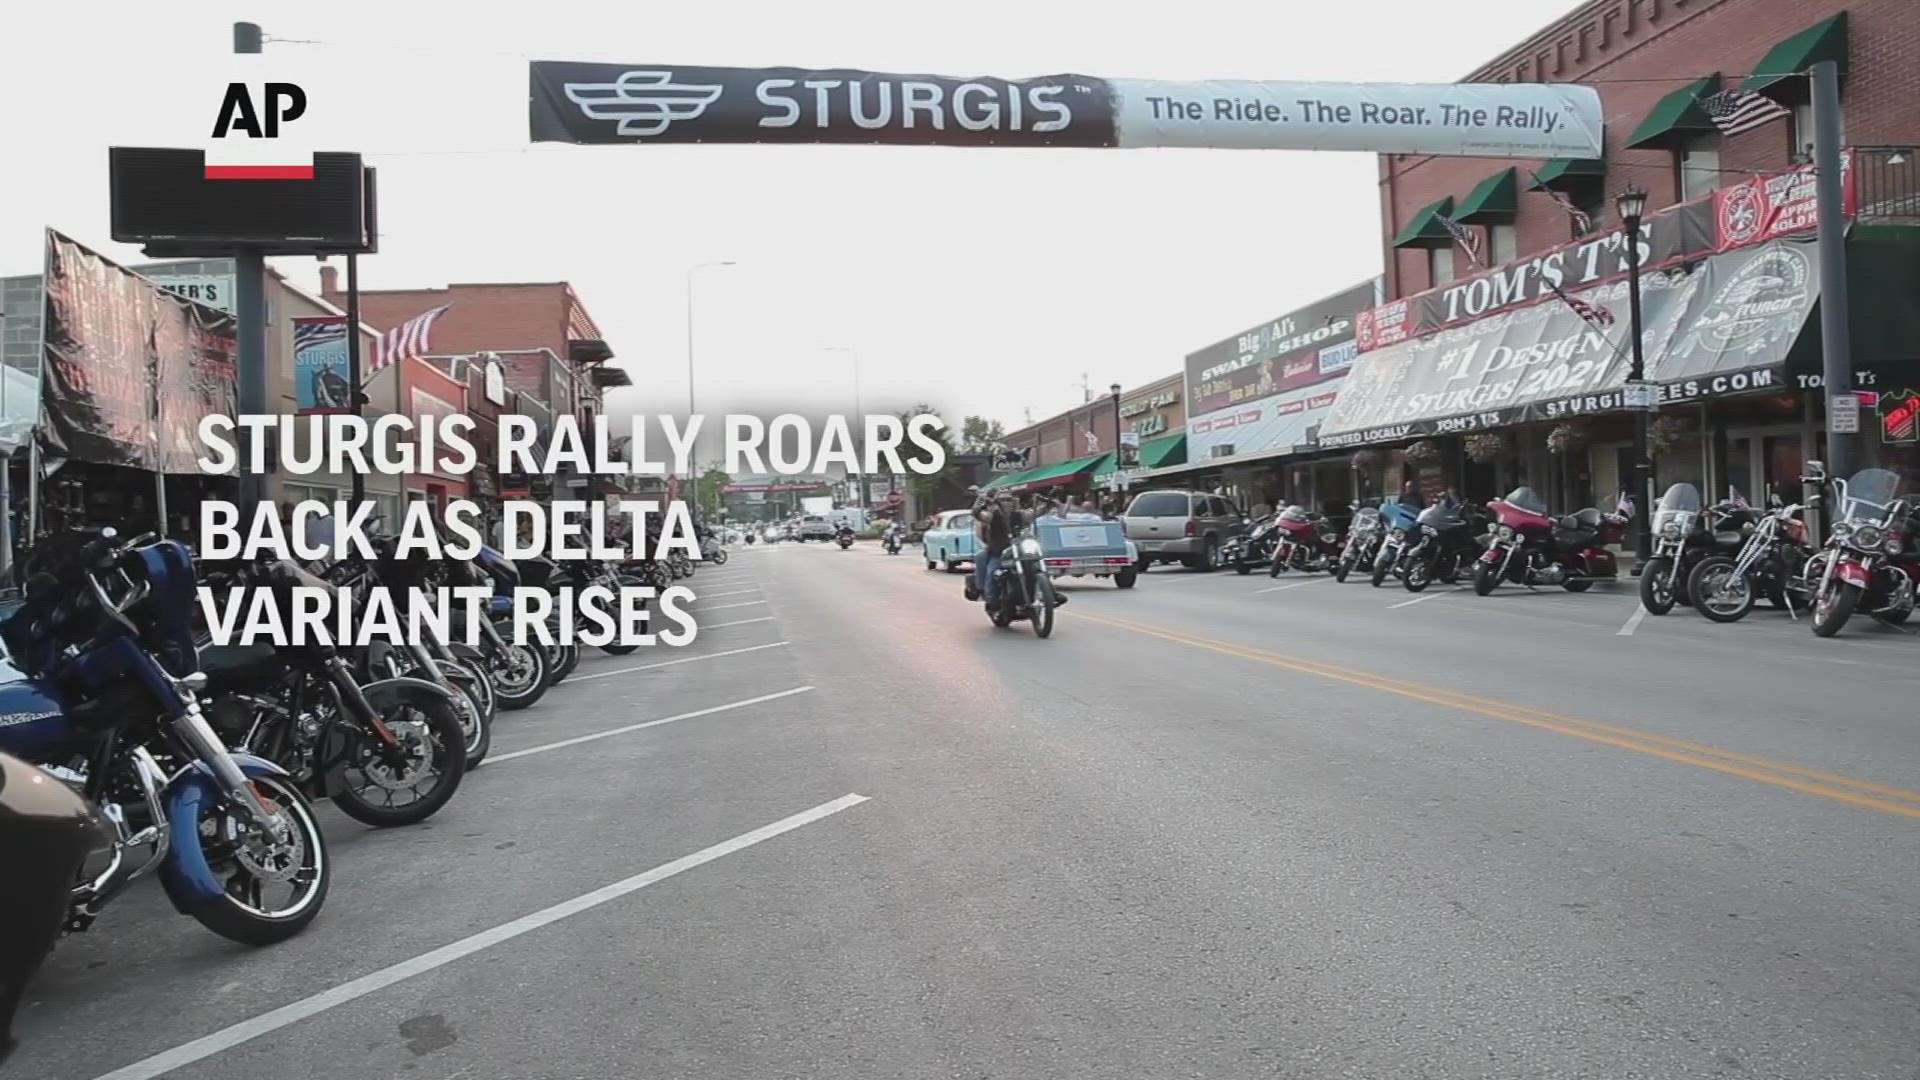 The annual Sturgis Motorcycle Rally returns just as coronavirus cases in the state are rising with the more contagious delta variant.